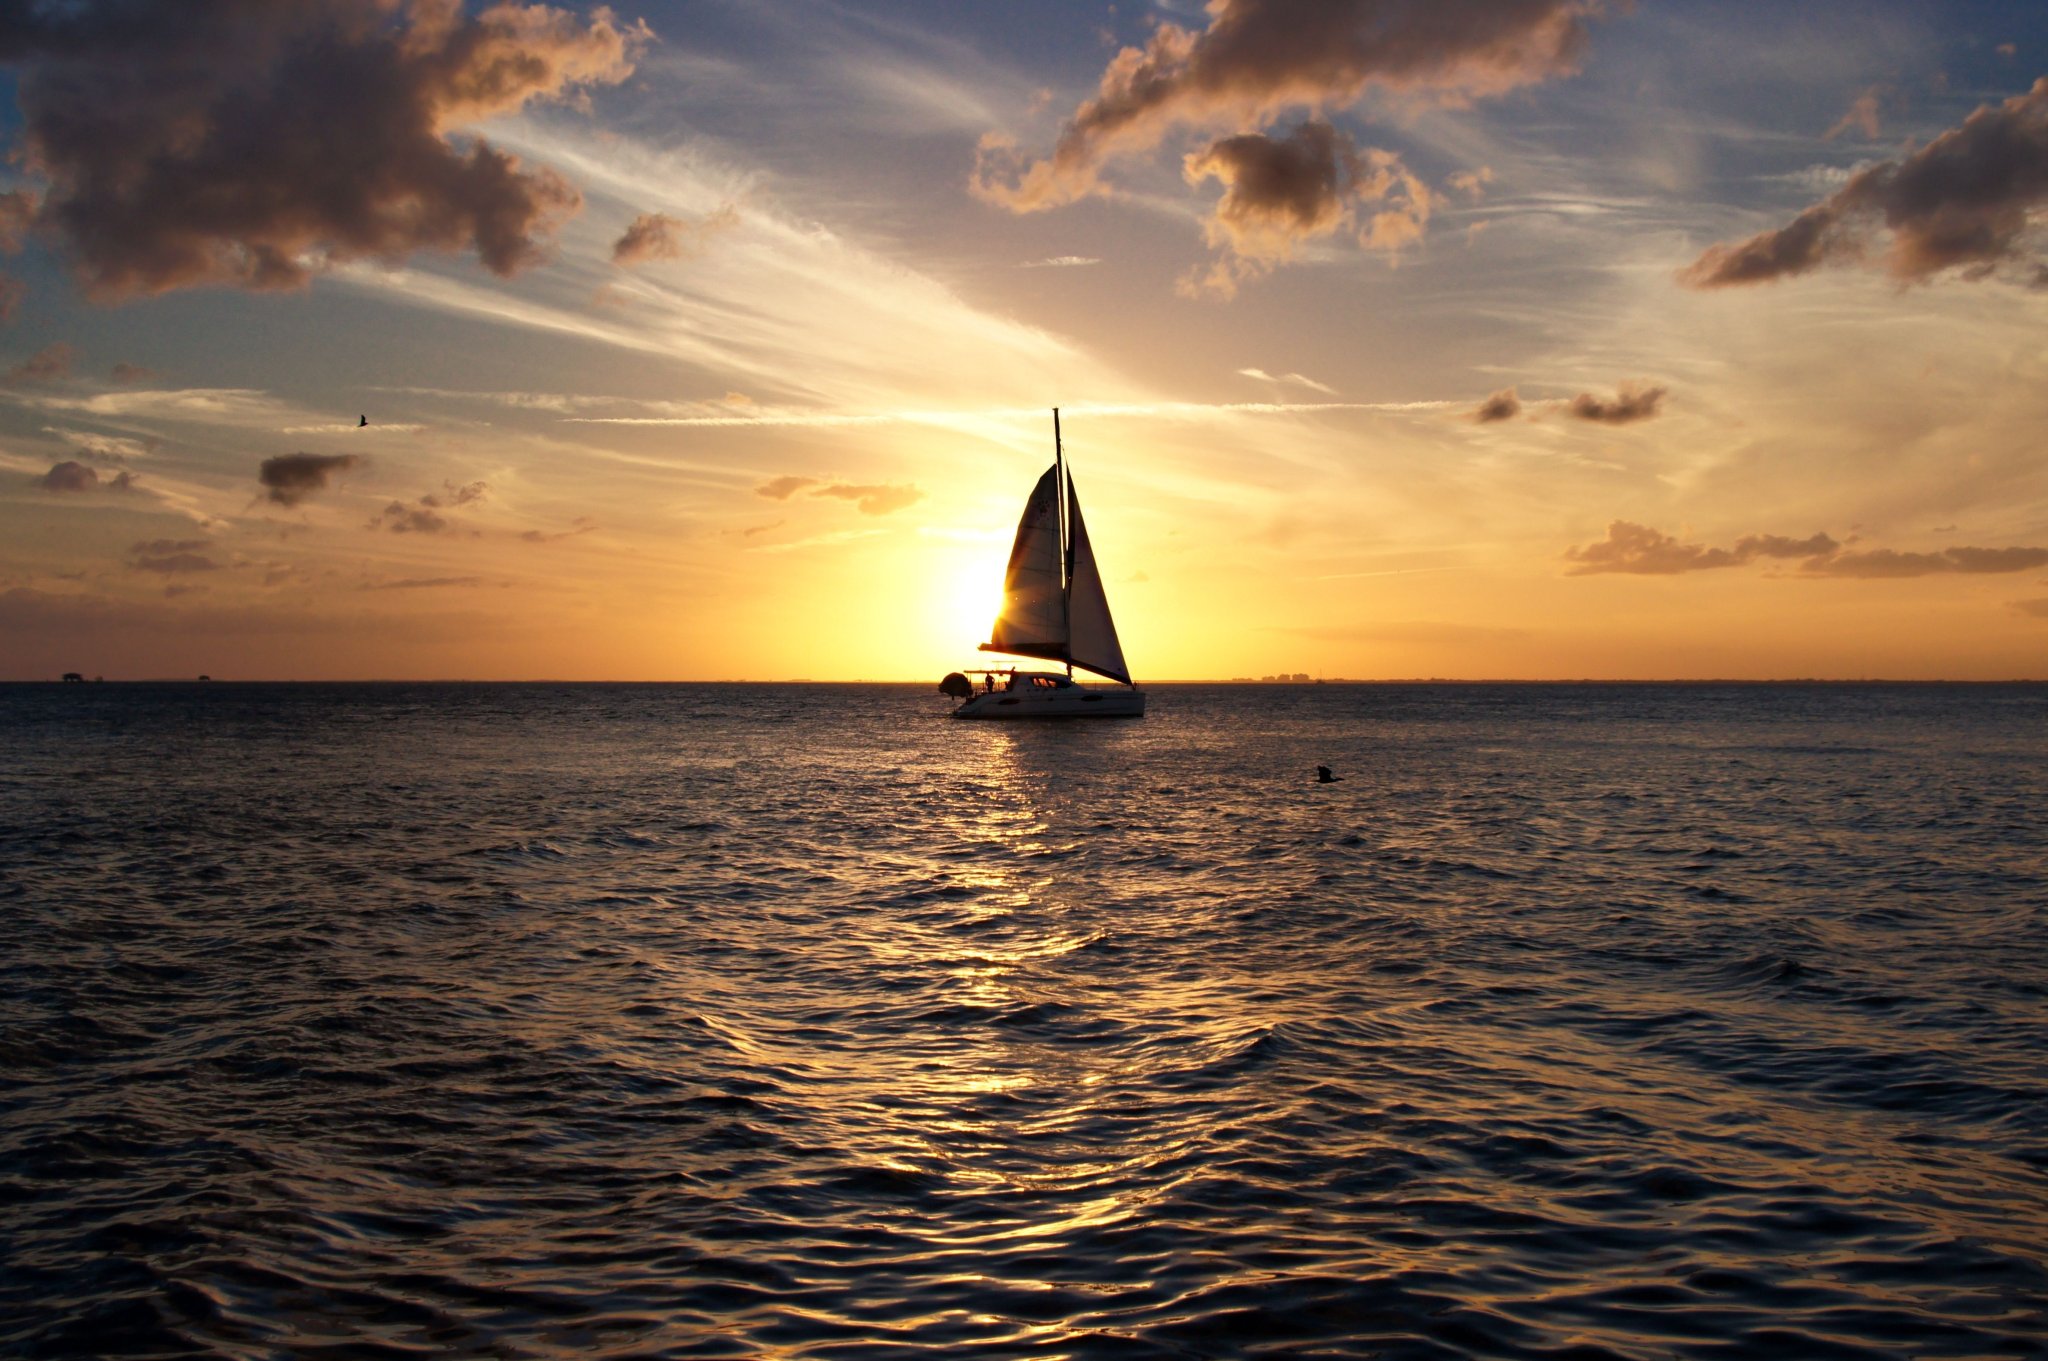 10 Steps for Beginning to Sail